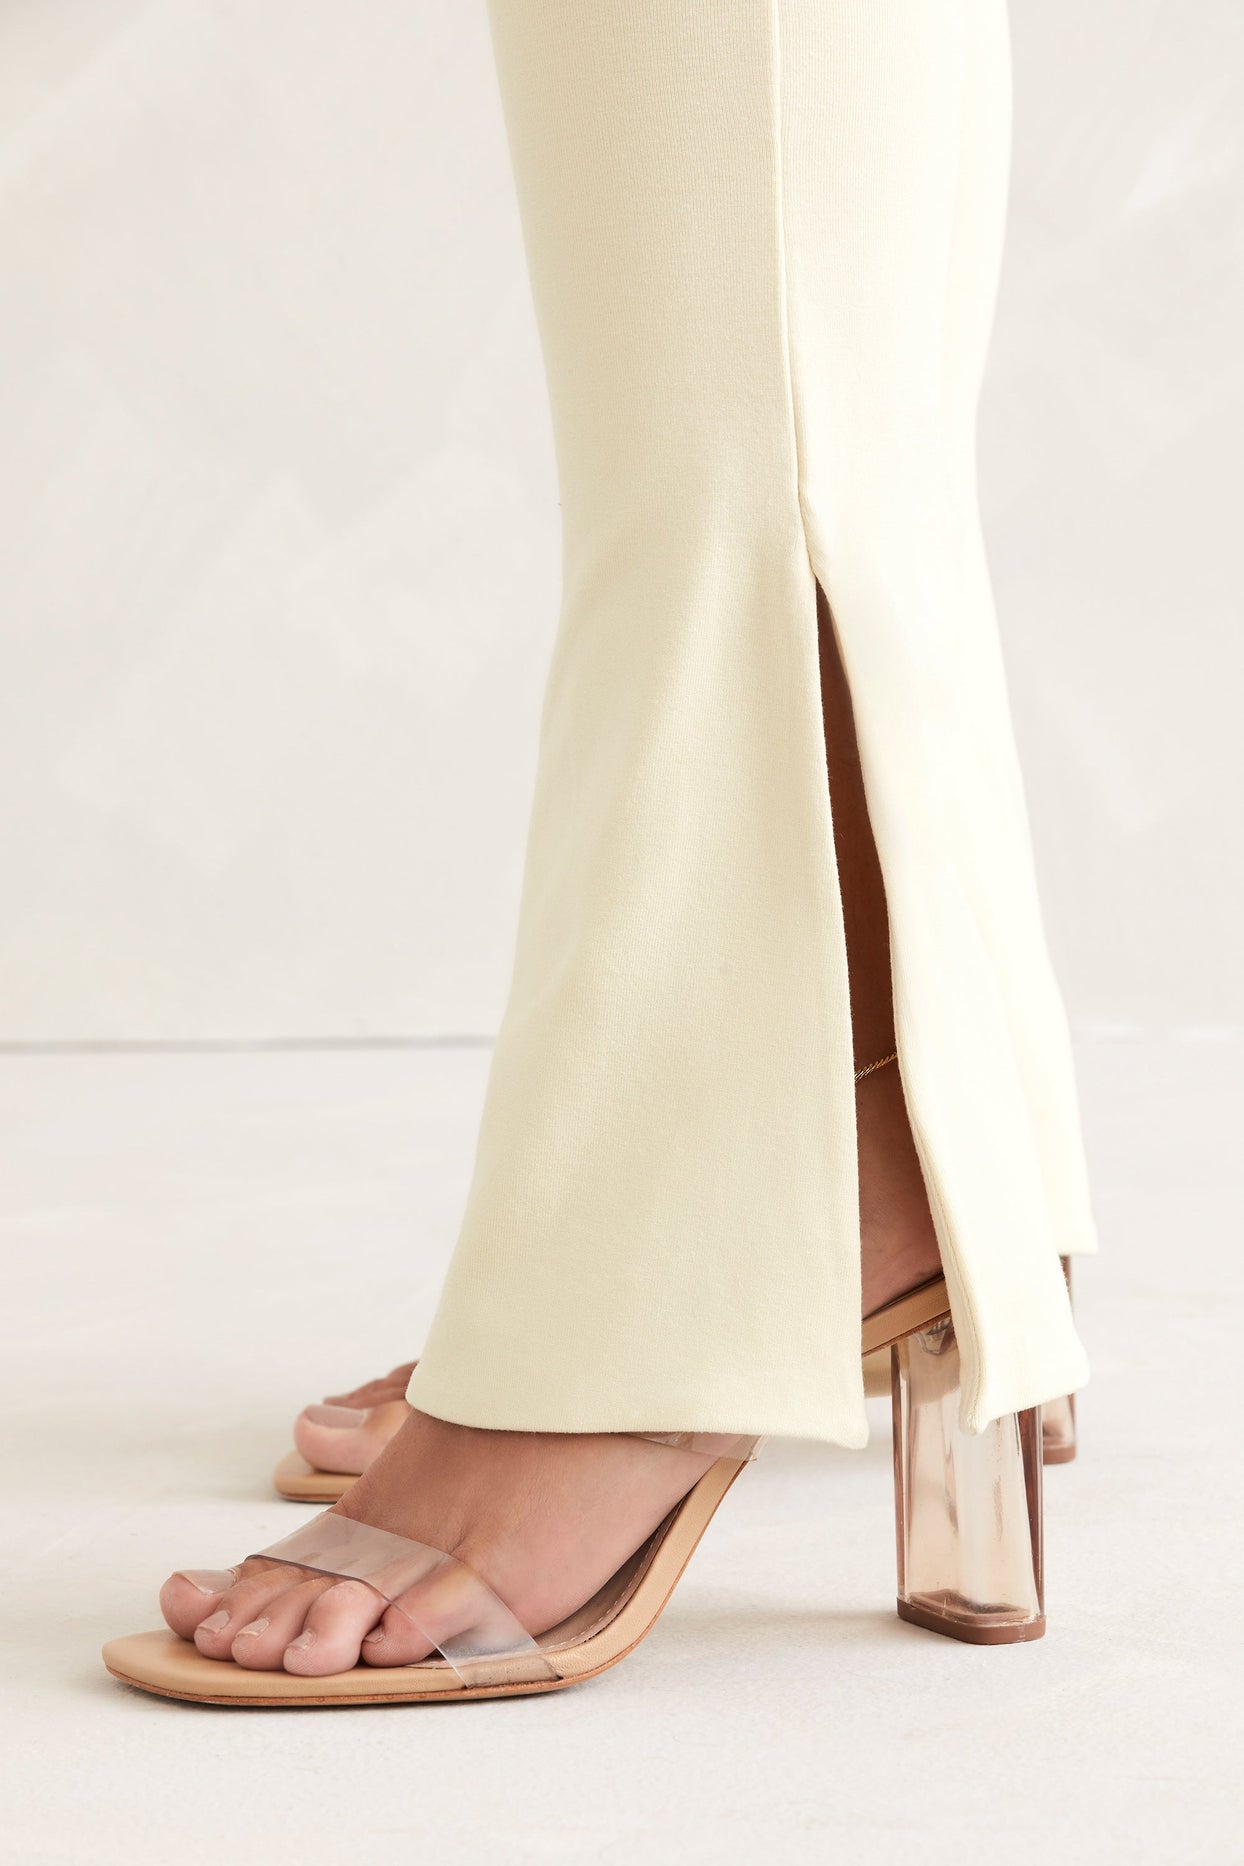 Long Sleeve Square Neck Jumpsuit in Ivory